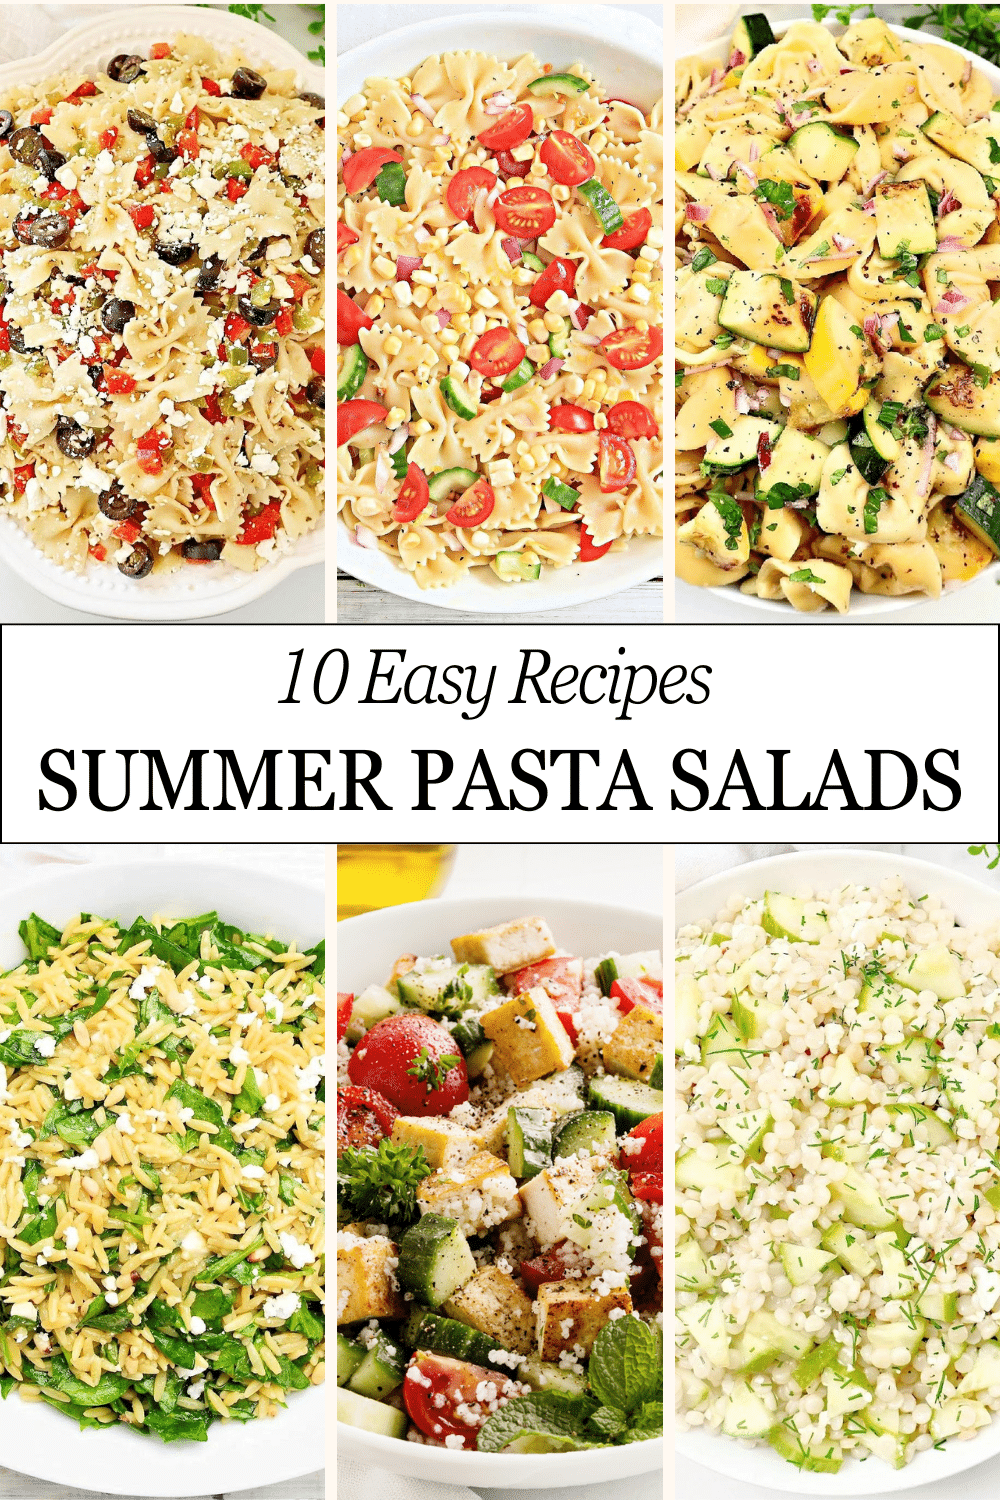 10 Best Summer Pasta Salads ~ These crowd-pleasing dishes are easy to make and perfect for sharing fresh flavors of the season! via @thiswifecooks